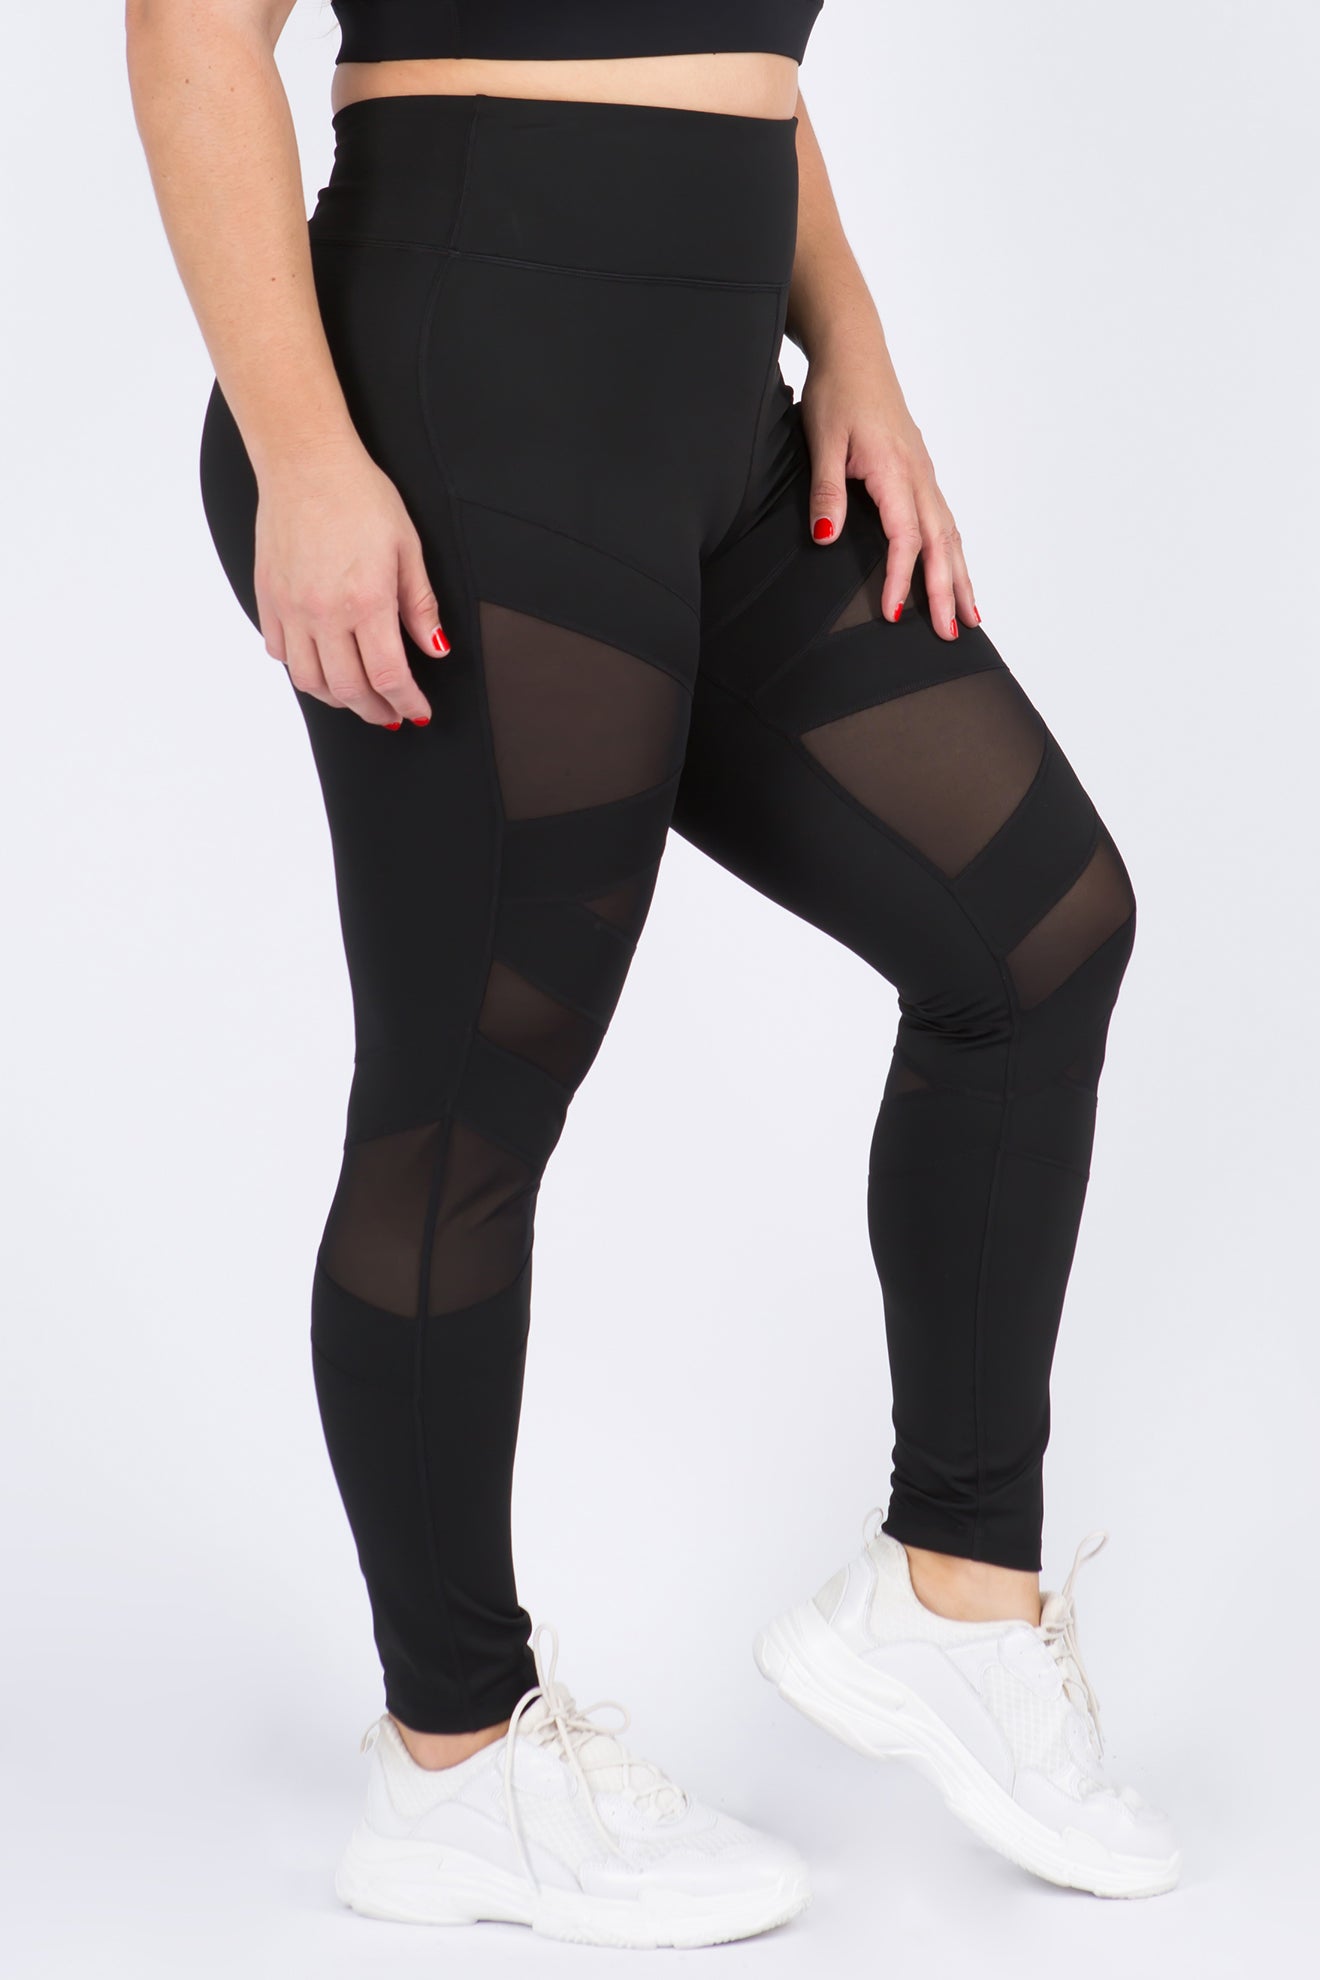 Plus Size Sports Leggings, Women's Plus Solid Pipping Contrast Mesh High *  Medium Stretch Skinny Leggings With Phone Pocket